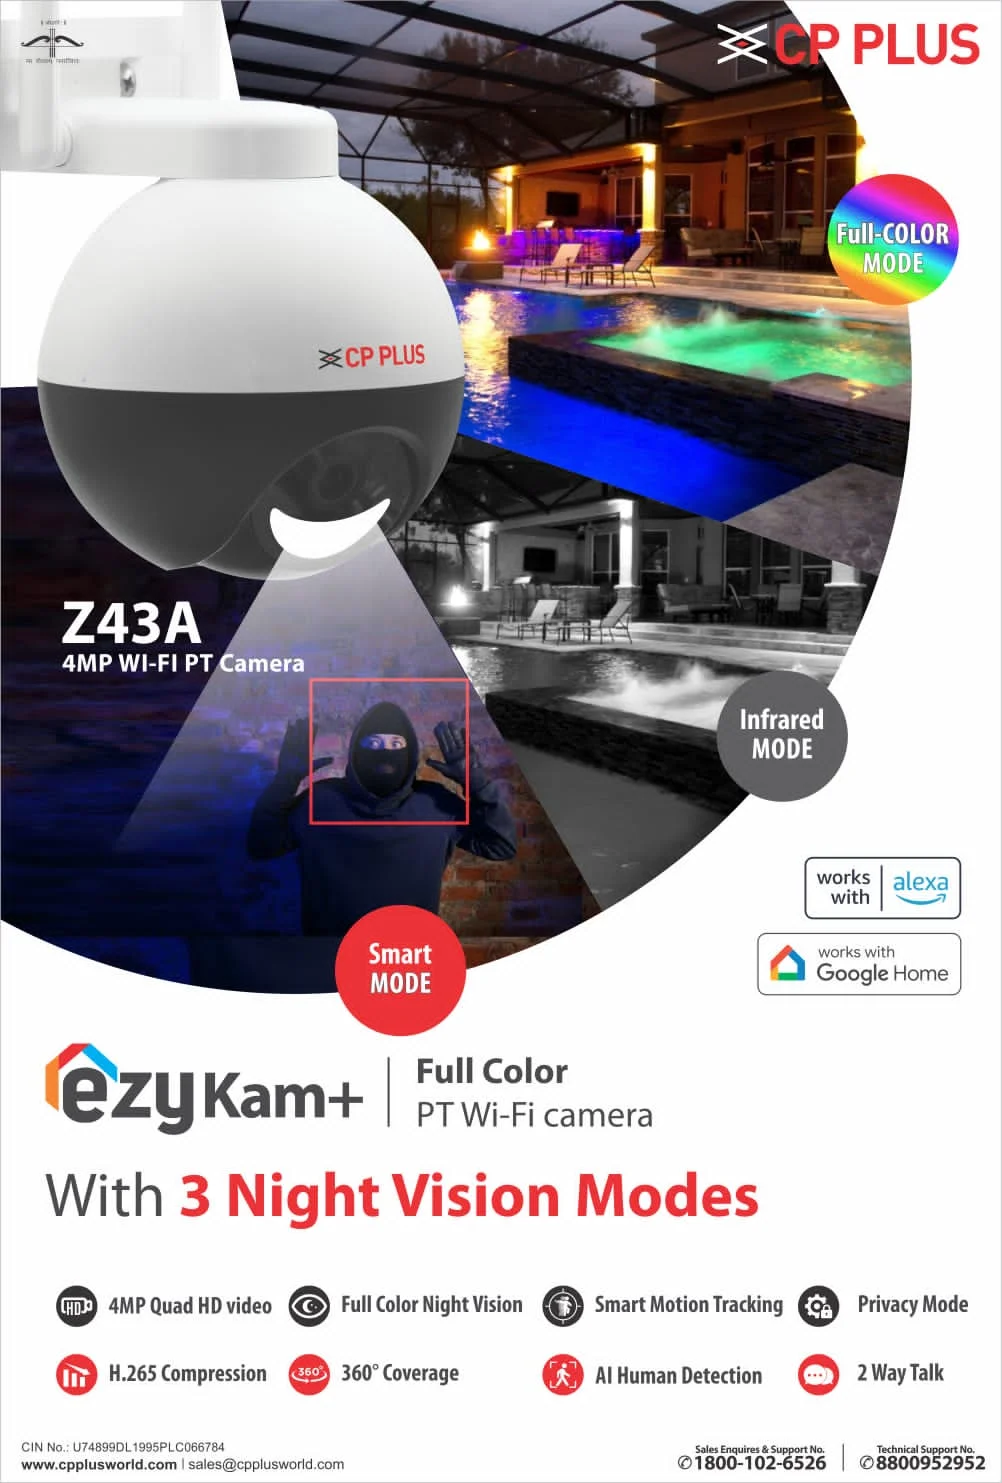 ezyKam+ With 3 Night Vision Modes